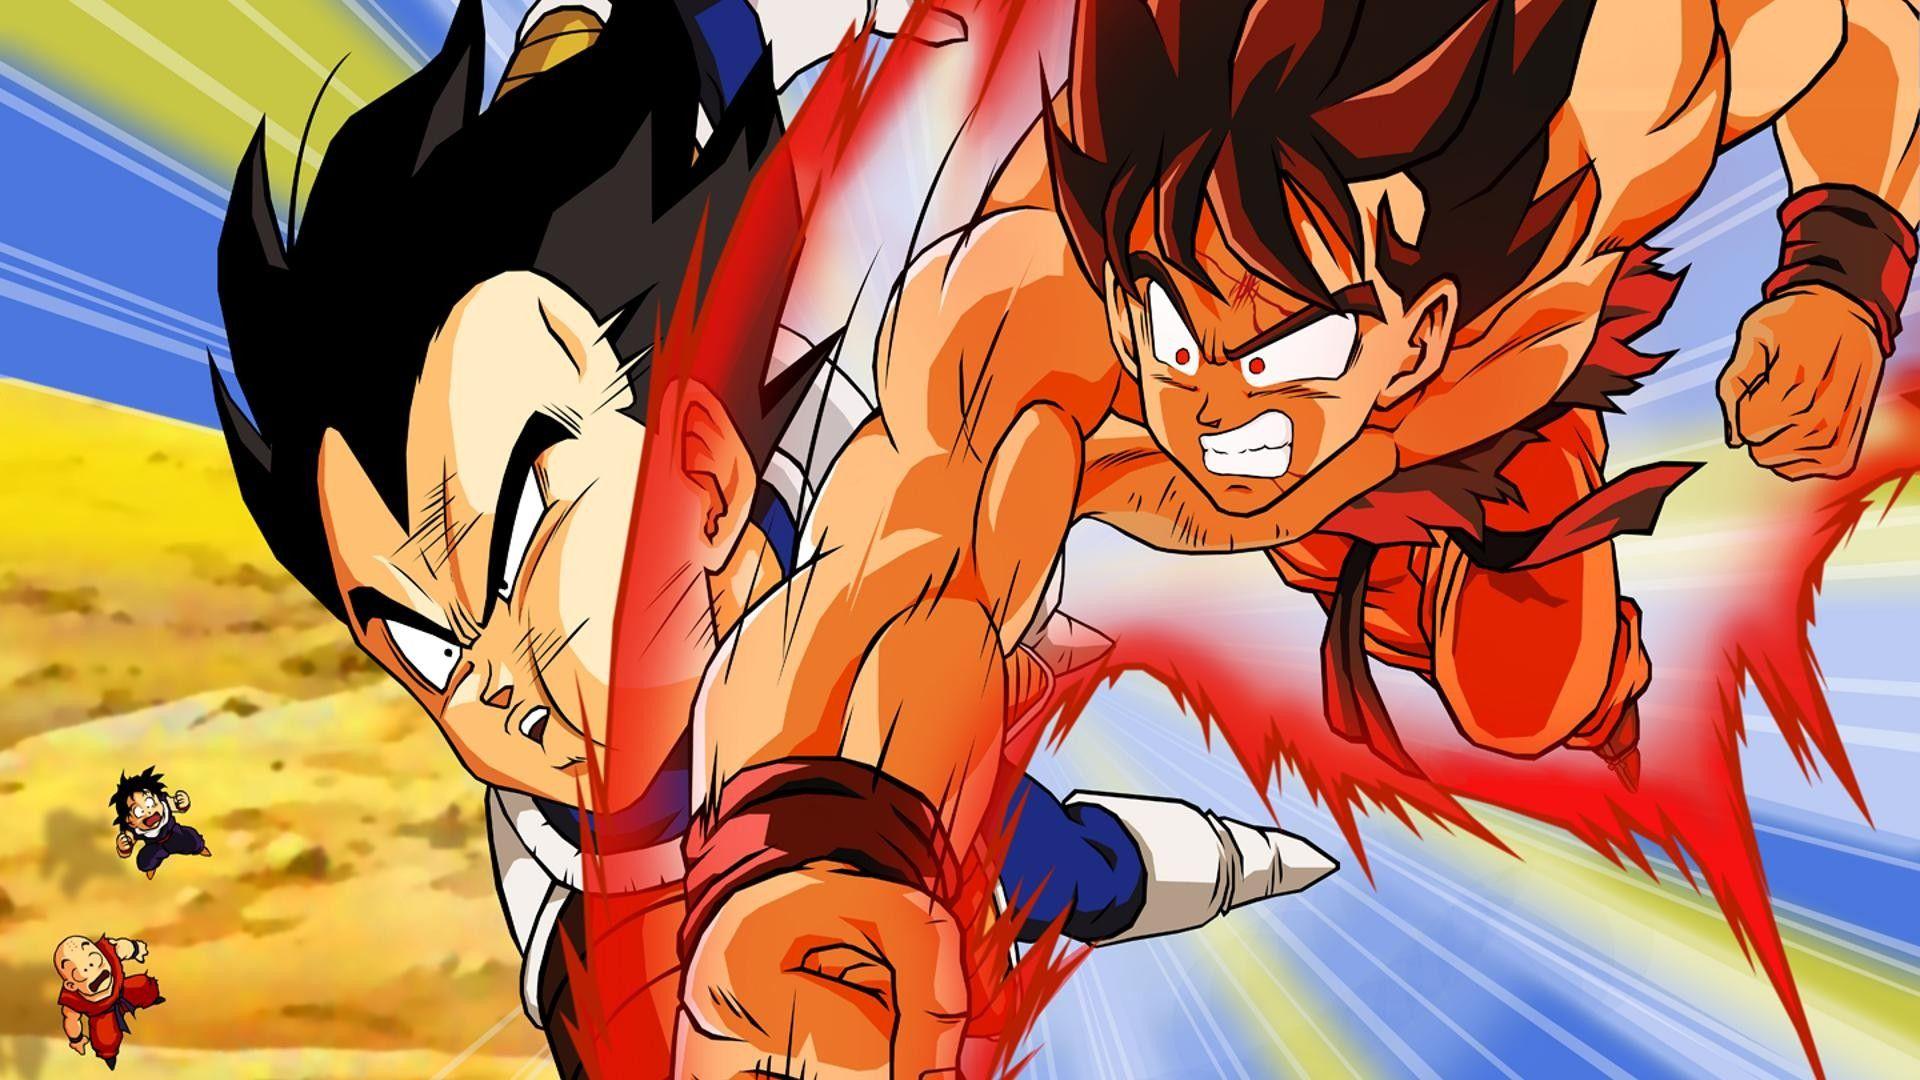 914 Kb Png - Dragon Ball Fighting Stance - 2775x3300 PNG Download - PNGkit